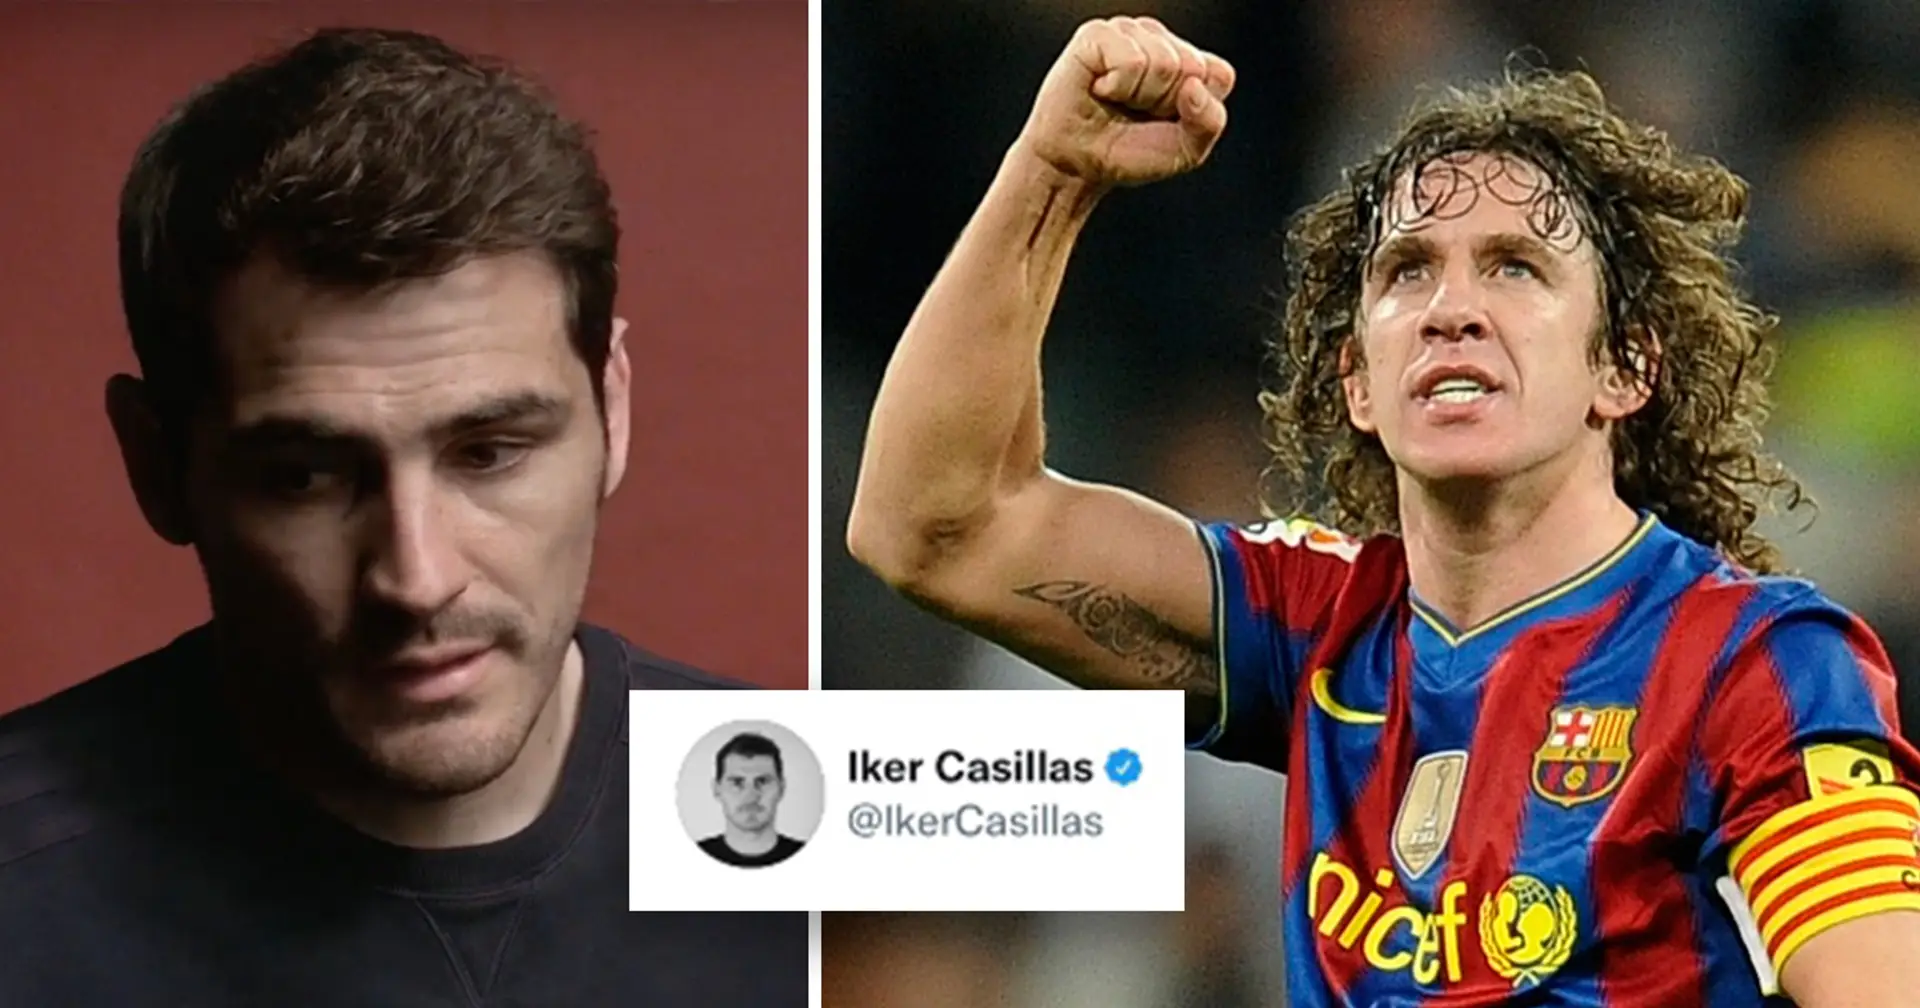 'It's time to tell our story, Iker': Iker Casillas comes out as a gay, Carles Puyol immediately reacts